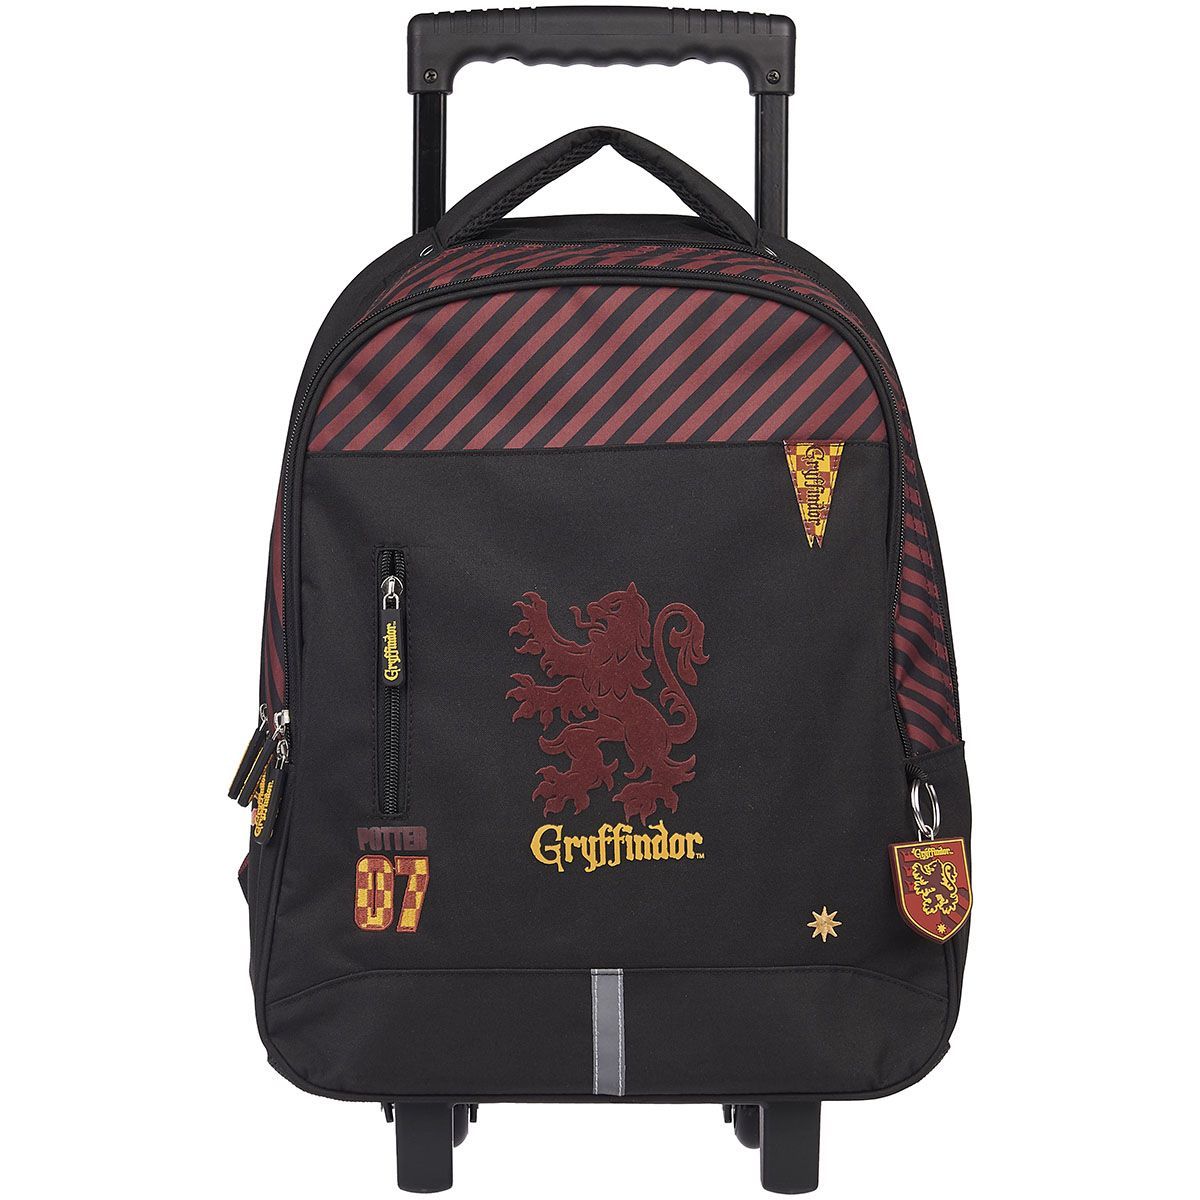 Cartable harry potter sac à dos trolley - Harry Potter